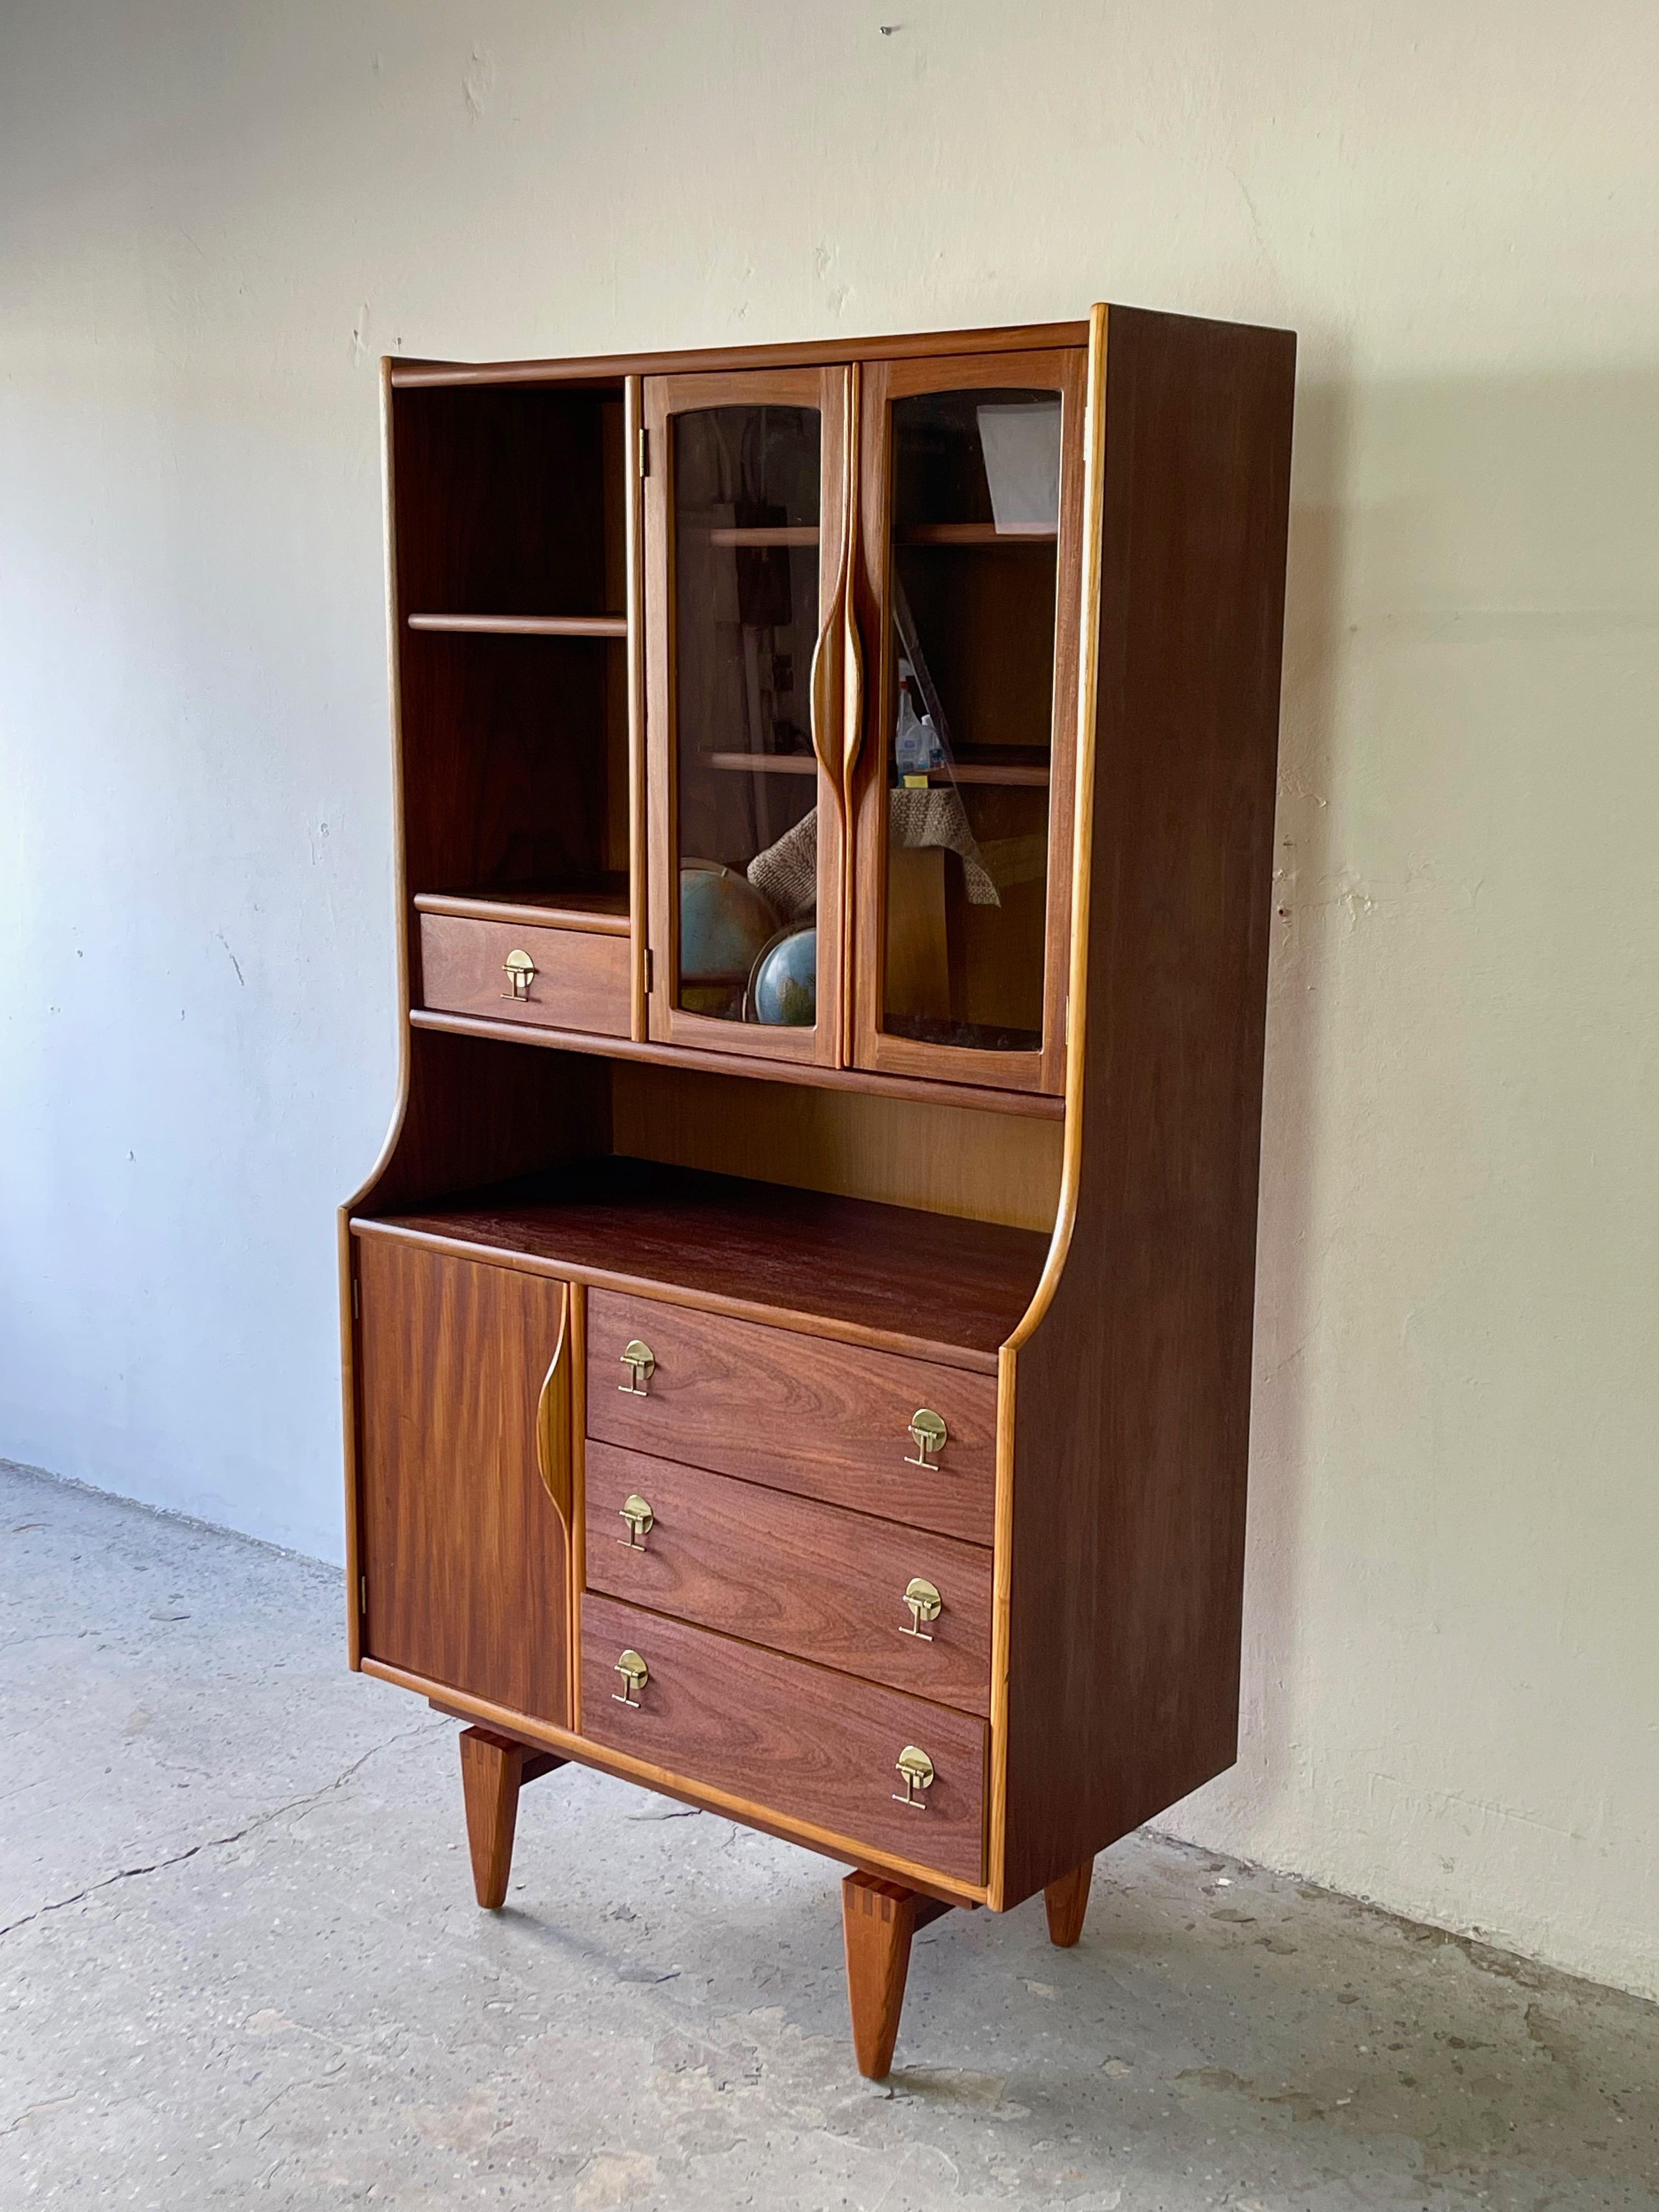 Mid-Century Modern walnut Stanley display hutch / china cabinet in a unique compact size. . This piece offers many unique features dovetailed tapered wood legs, two tone wood, glass doors with unique curved handles and brass pulls. Lower cabinet has